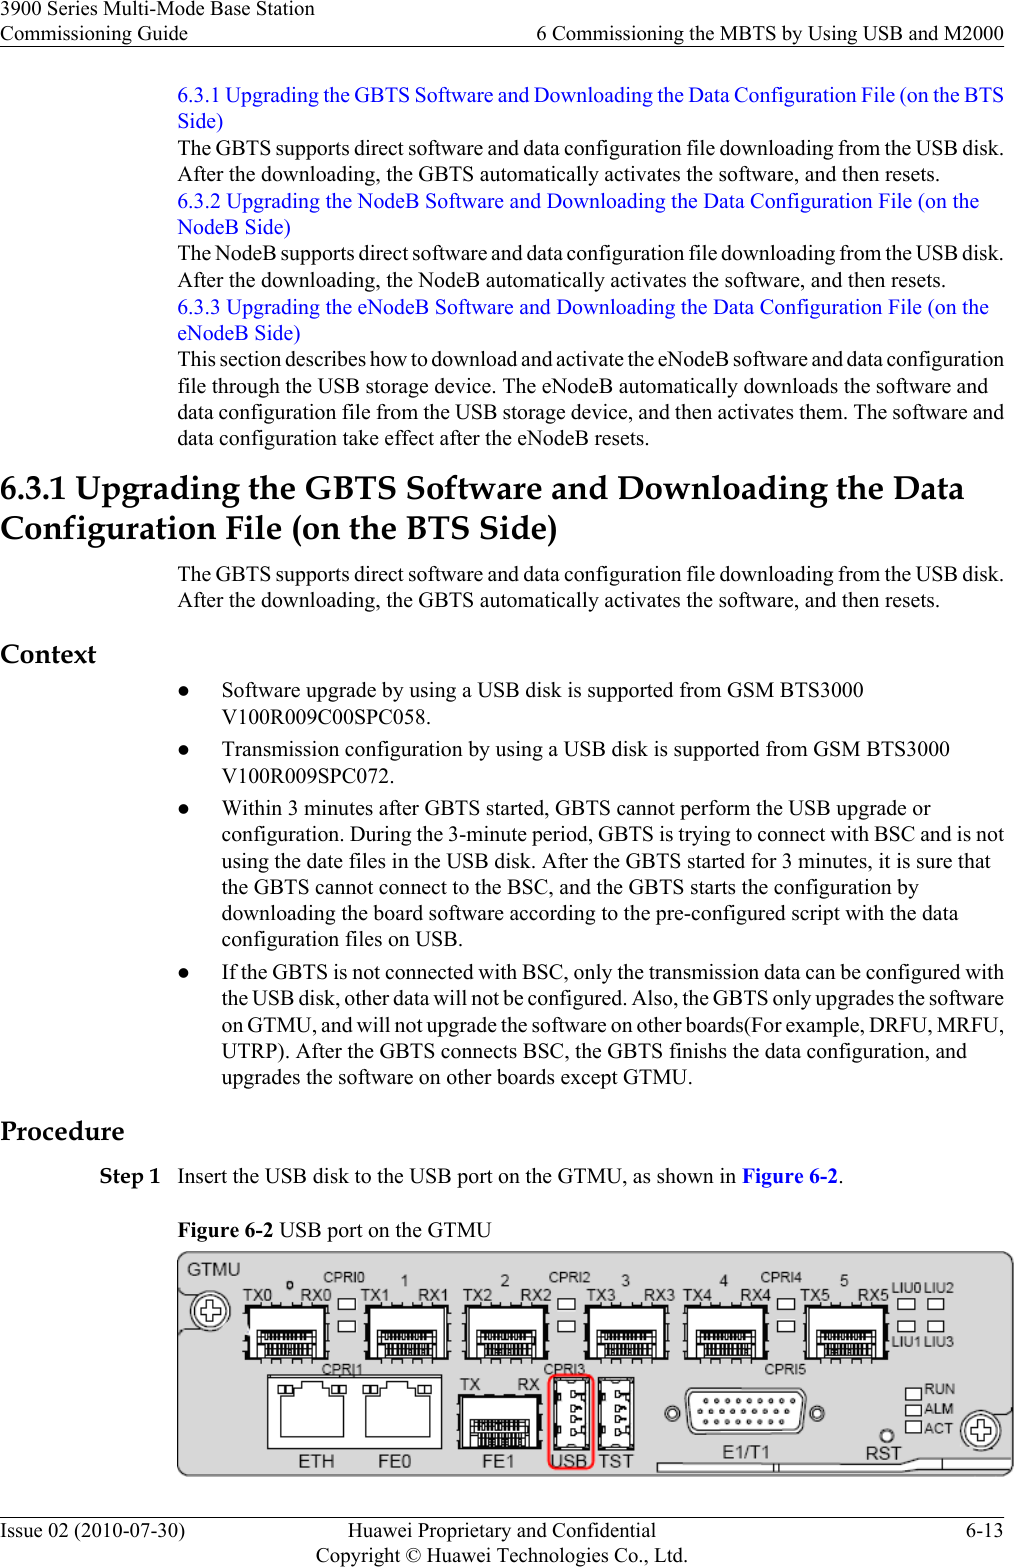 6.3.1 Upgrading the GBTS Software and Downloading the Data Configuration File (on the BTSSide)The GBTS supports direct software and data configuration file downloading from the USB disk.After the downloading, the GBTS automatically activates the software, and then resets.6.3.2 Upgrading the NodeB Software and Downloading the Data Configuration File (on theNodeB Side)The NodeB supports direct software and data configuration file downloading from the USB disk.After the downloading, the NodeB automatically activates the software, and then resets.6.3.3 Upgrading the eNodeB Software and Downloading the Data Configuration File (on theeNodeB Side)This section describes how to download and activate the eNodeB software and data configurationfile through the USB storage device. The eNodeB automatically downloads the software anddata configuration file from the USB storage device, and then activates them. The software anddata configuration take effect after the eNodeB resets.6.3.1 Upgrading the GBTS Software and Downloading the DataConfiguration File (on the BTS Side)The GBTS supports direct software and data configuration file downloading from the USB disk.After the downloading, the GBTS automatically activates the software, and then resets.ContextlSoftware upgrade by using a USB disk is supported from GSM BTS3000V100R009C00SPC058.lTransmission configuration by using a USB disk is supported from GSM BTS3000V100R009SPC072.lWithin 3 minutes after GBTS started, GBTS cannot perform the USB upgrade orconfiguration. During the 3-minute period, GBTS is trying to connect with BSC and is notusing the date files in the USB disk. After the GBTS started for 3 minutes, it is sure thatthe GBTS cannot connect to the BSC, and the GBTS starts the configuration bydownloading the board software according to the pre-configured script with the dataconfiguration files on USB.lIf the GBTS is not connected with BSC, only the transmission data can be configured withthe USB disk, other data will not be configured. Also, the GBTS only upgrades the softwareon GTMU, and will not upgrade the software on other boards(For example, DRFU, MRFU,UTRP). After the GBTS connects BSC, the GBTS finishs the data configuration, andupgrades the software on other boards except GTMU.ProcedureStep 1 Insert the USB disk to the USB port on the GTMU, as shown in Figure 6-2.Figure 6-2 USB port on the GTMU3900 Series Multi-Mode Base StationCommissioning Guide 6 Commissioning the MBTS by Using USB and M2000Issue 02 (2010-07-30) Huawei Proprietary and ConfidentialCopyright © Huawei Technologies Co., Ltd.6-13